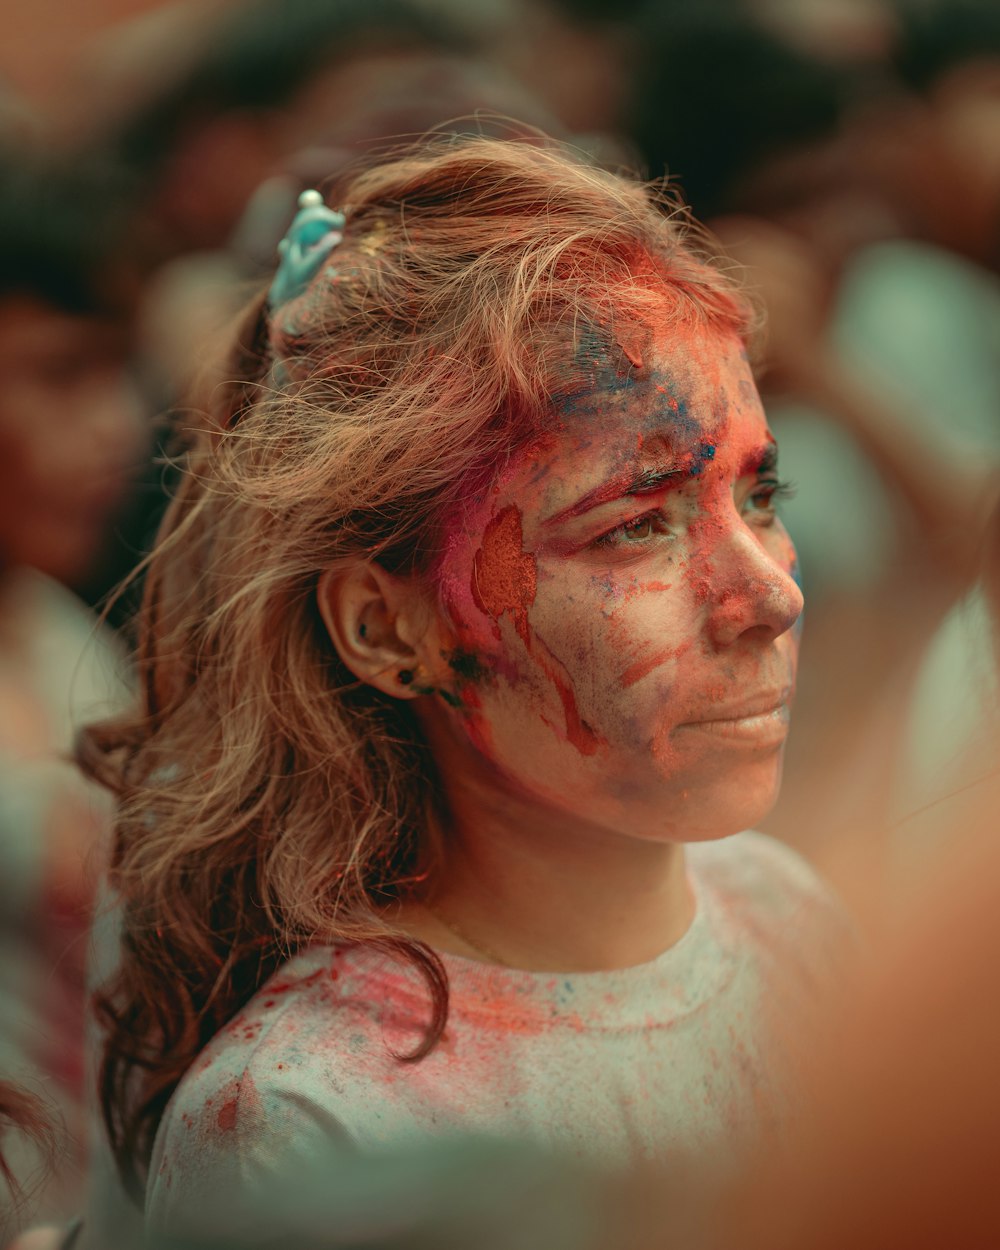 a young girl covered in red and blue paint